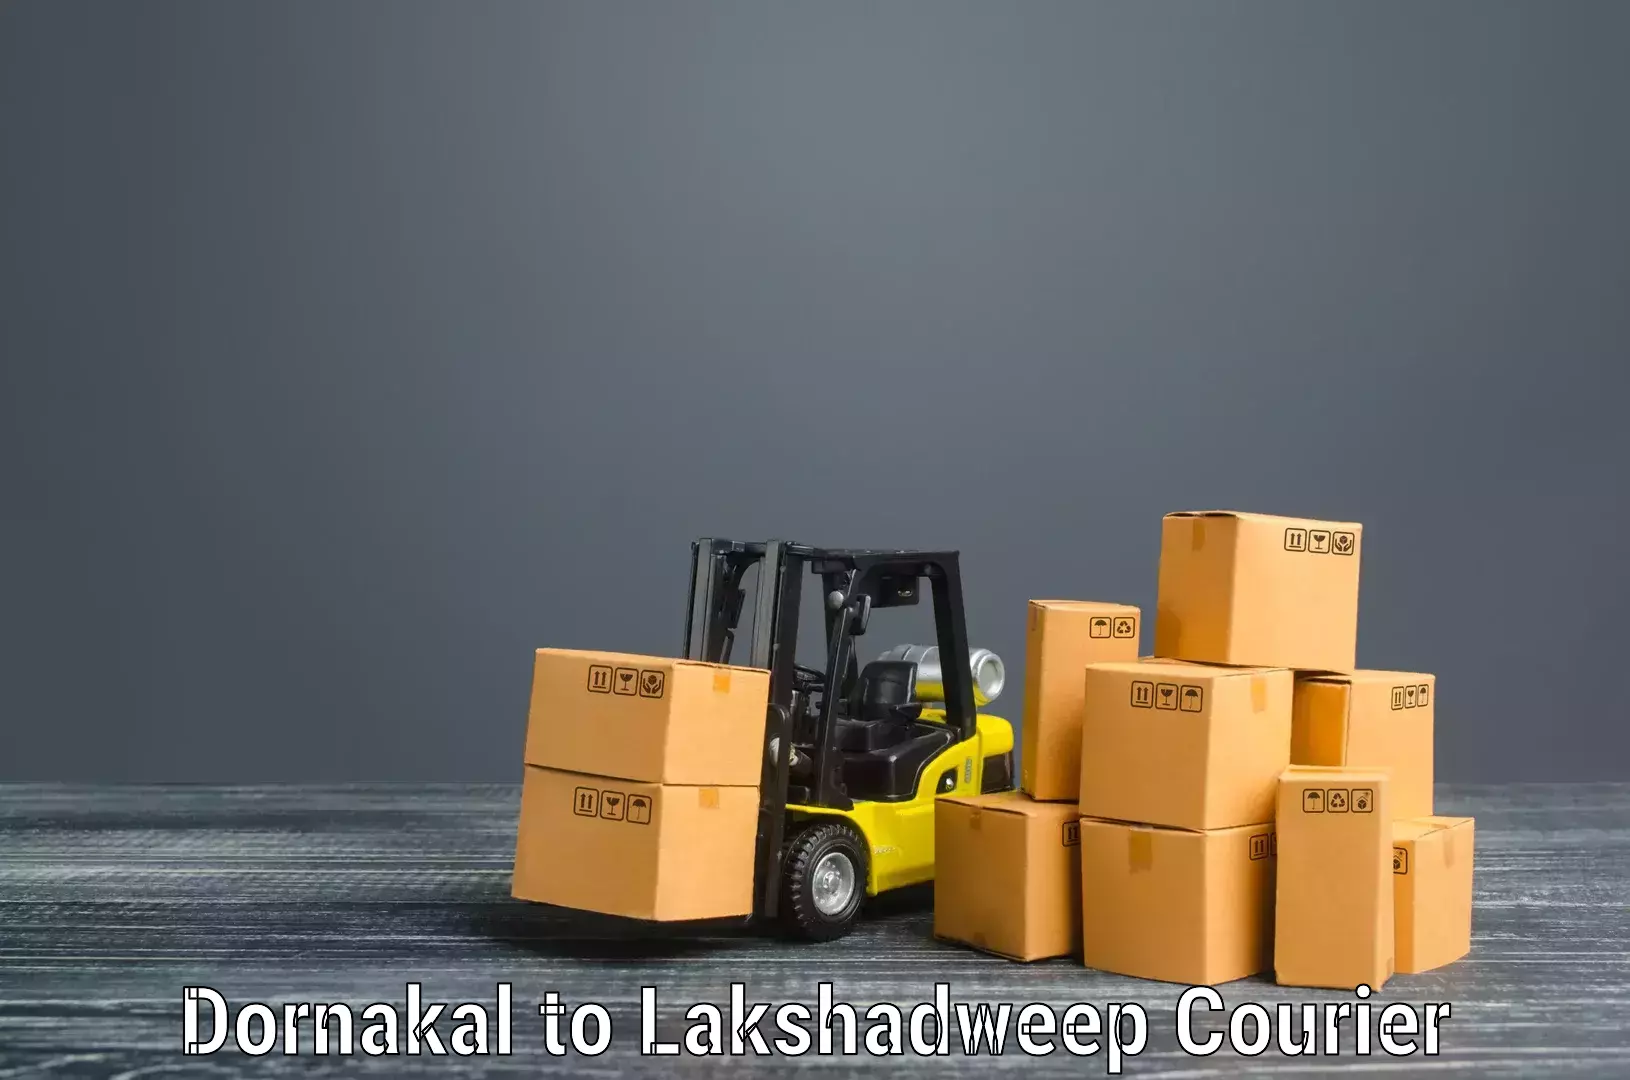 Furniture relocation services in Dornakal to Lakshadweep